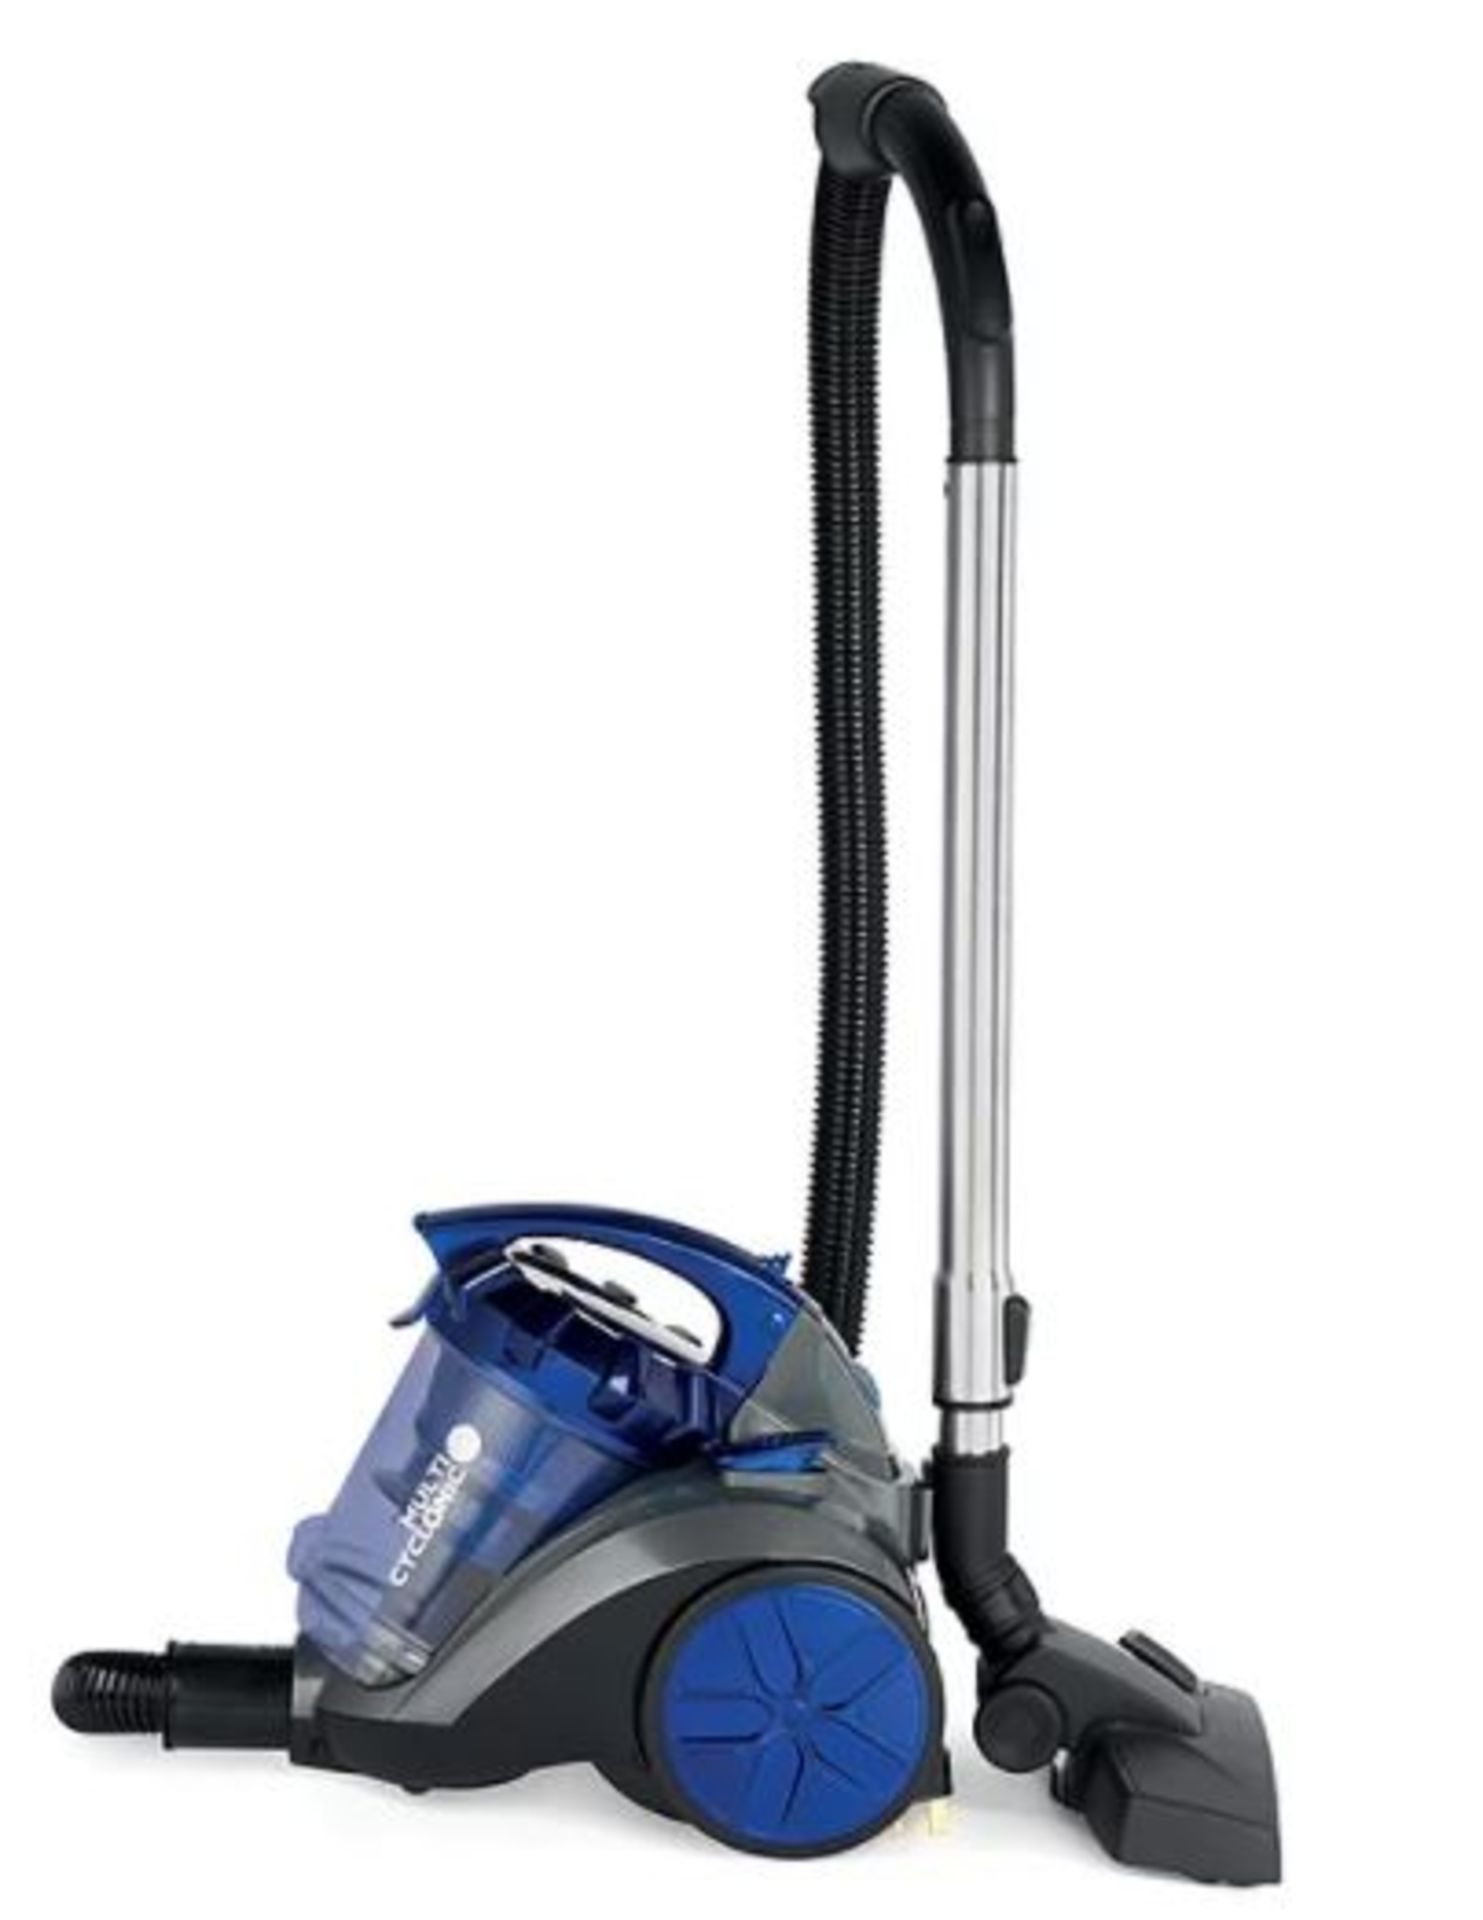 (15) 3x Vacuum Items. 2x Goblin Corded Stick Vacuum Cleaner. 1x Beldray Multi Cyclonic System. - Image 2 of 6